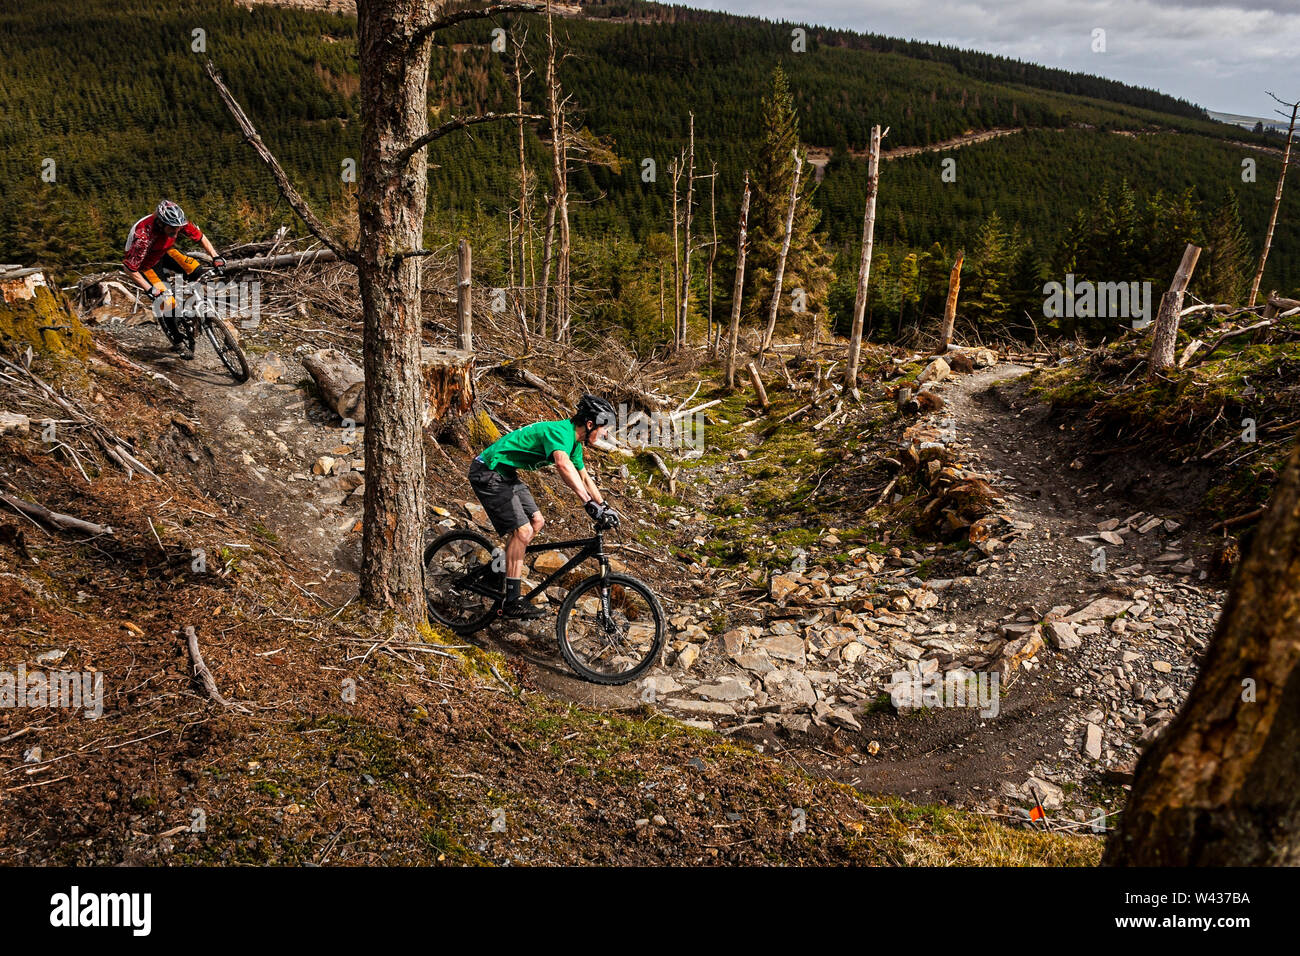 Two mountain bikers riding a rocky trail in the purpose built MTB trail centre. Stock Photo